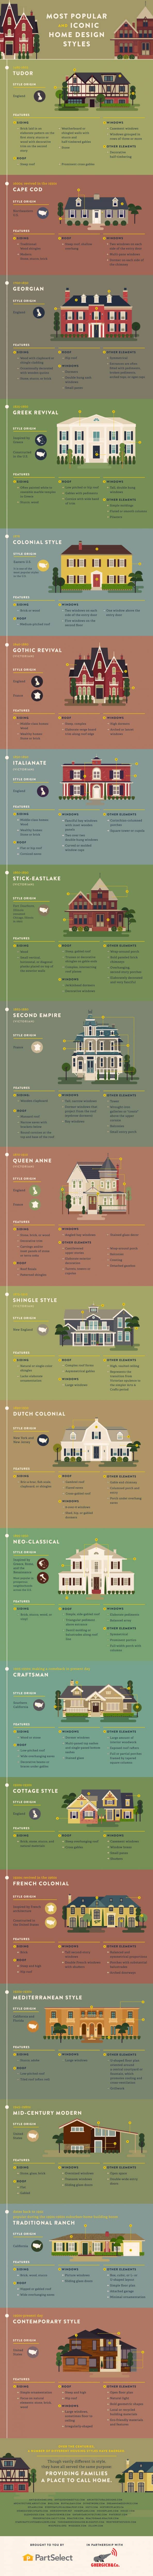 Infographic showing the most iconic home designs throughout history.